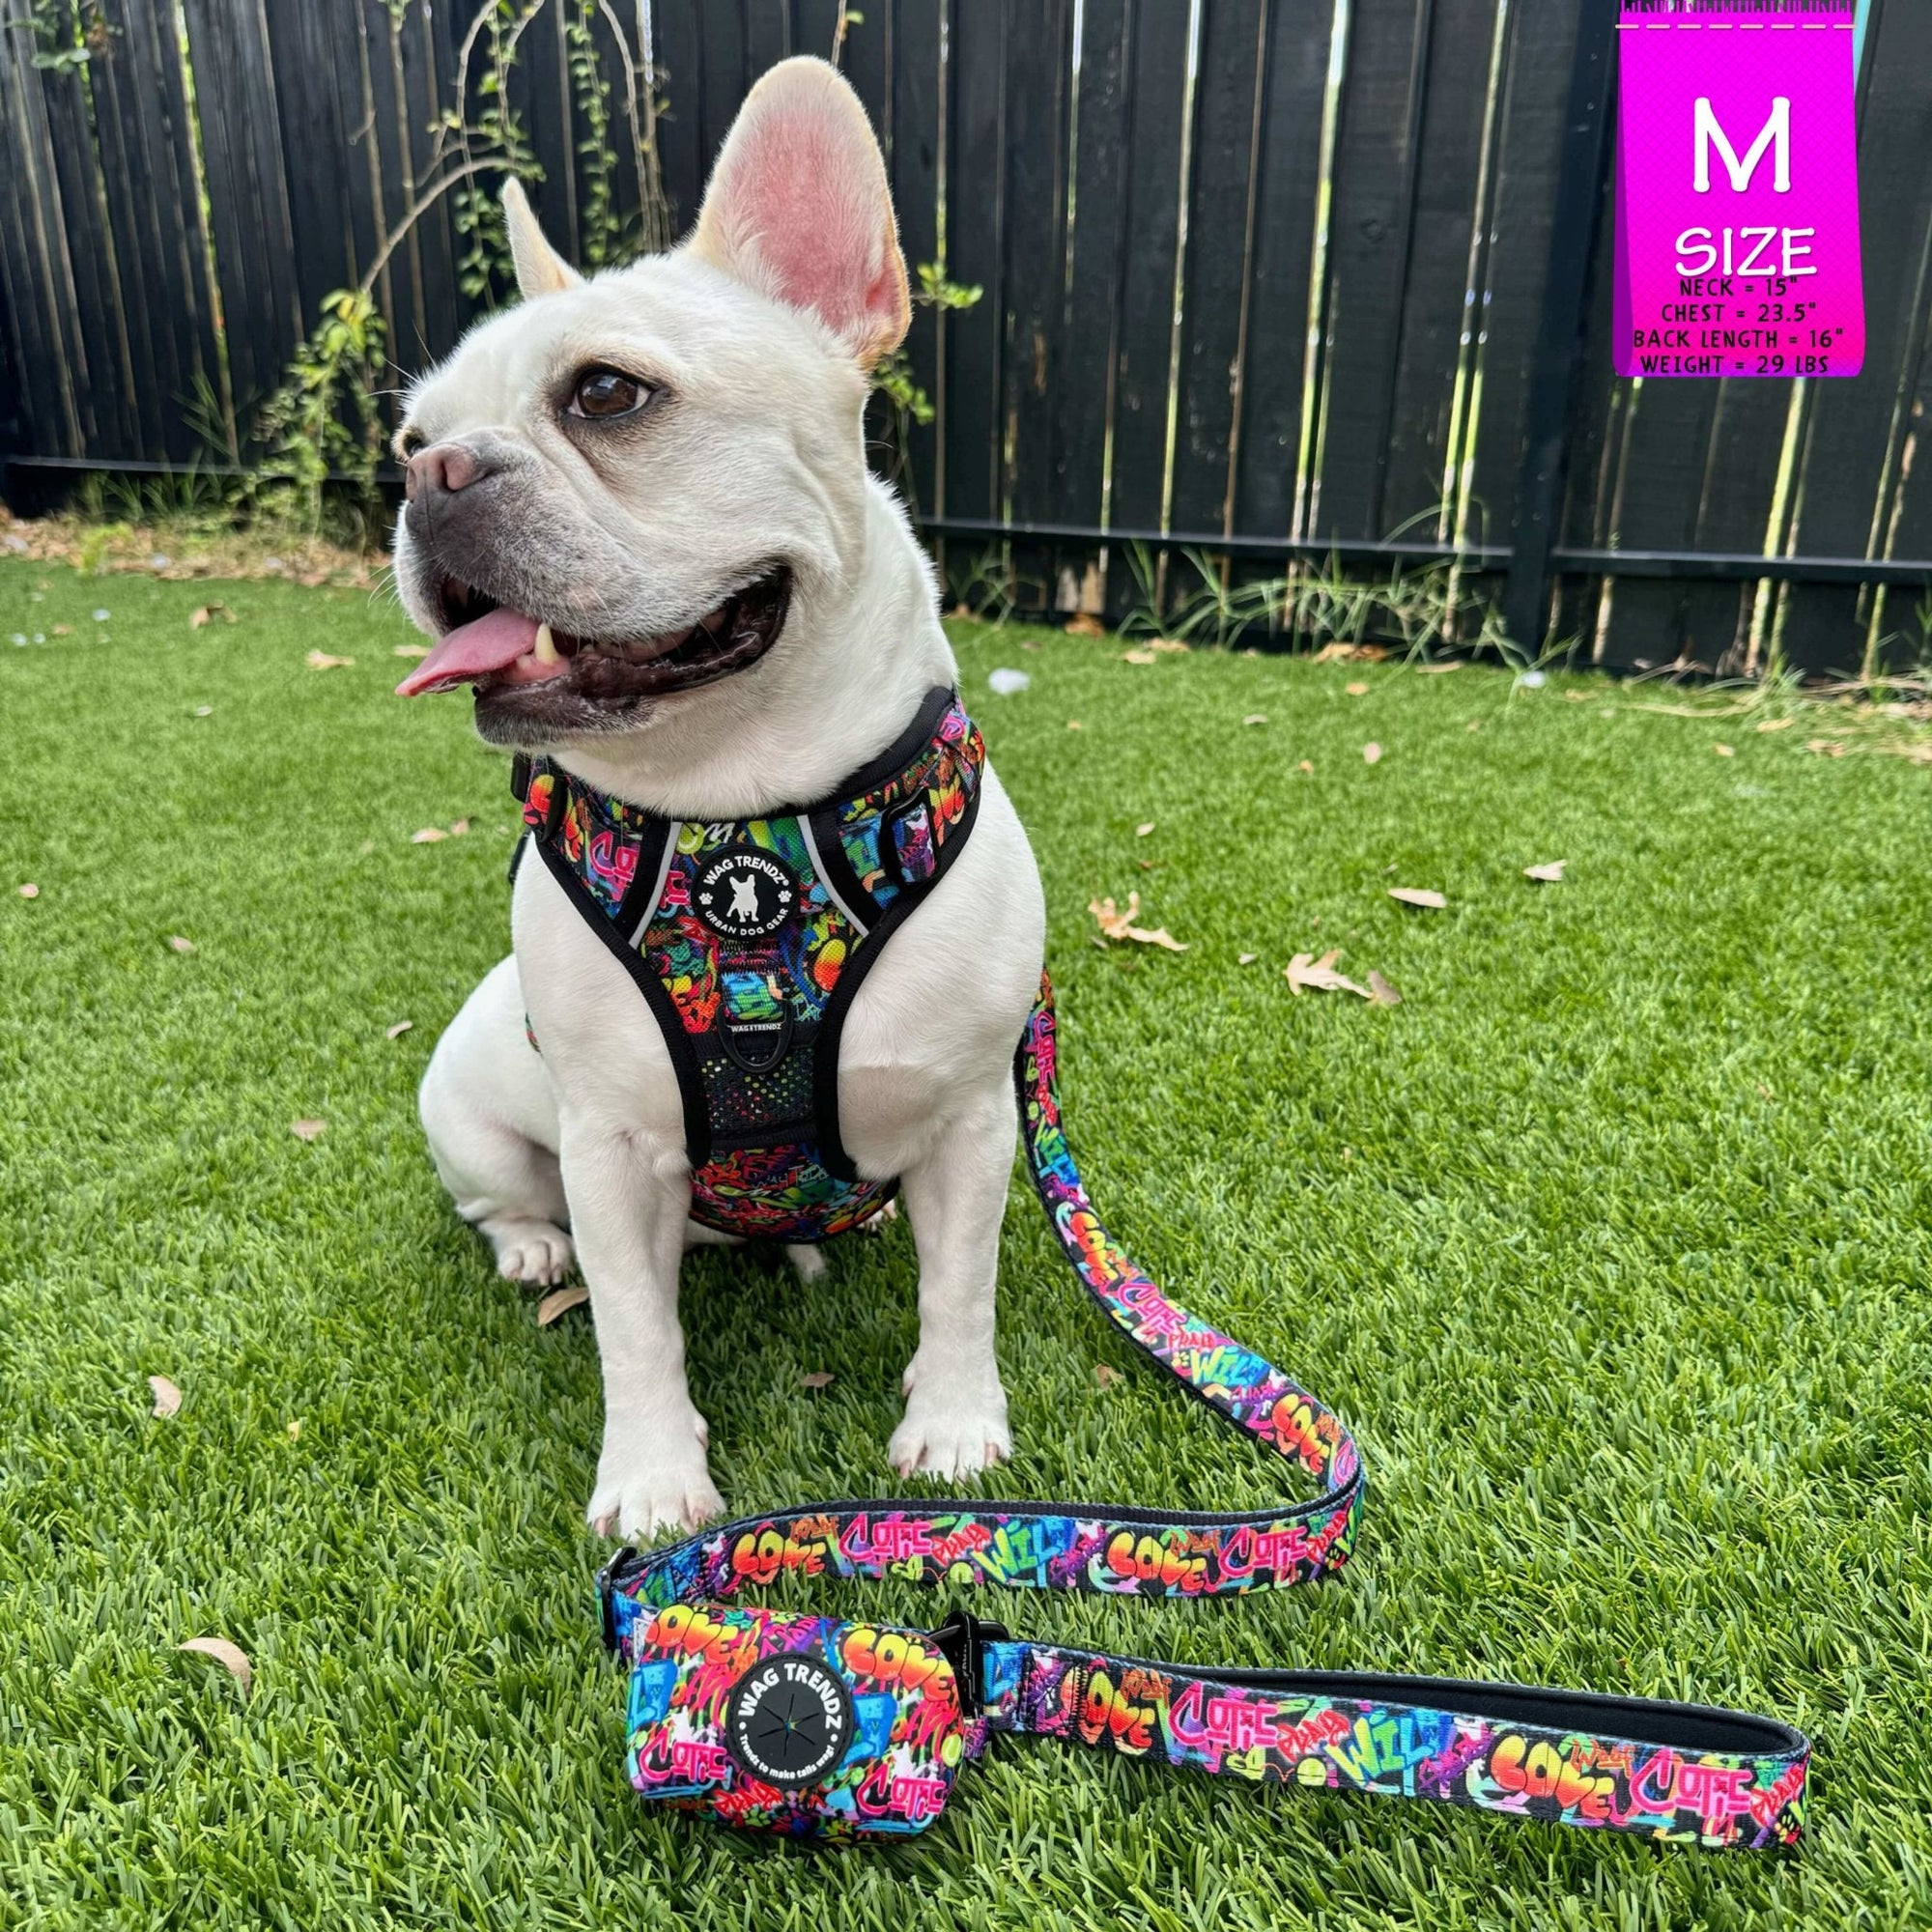 Dog Harness and Leash Set - French Bulldog wearing a medium no pull dog harness with handle - multi colored Street Graffiti - with matching adjustable leash and poop bag holder - sitting outdoors in the grass - Wag Trendz